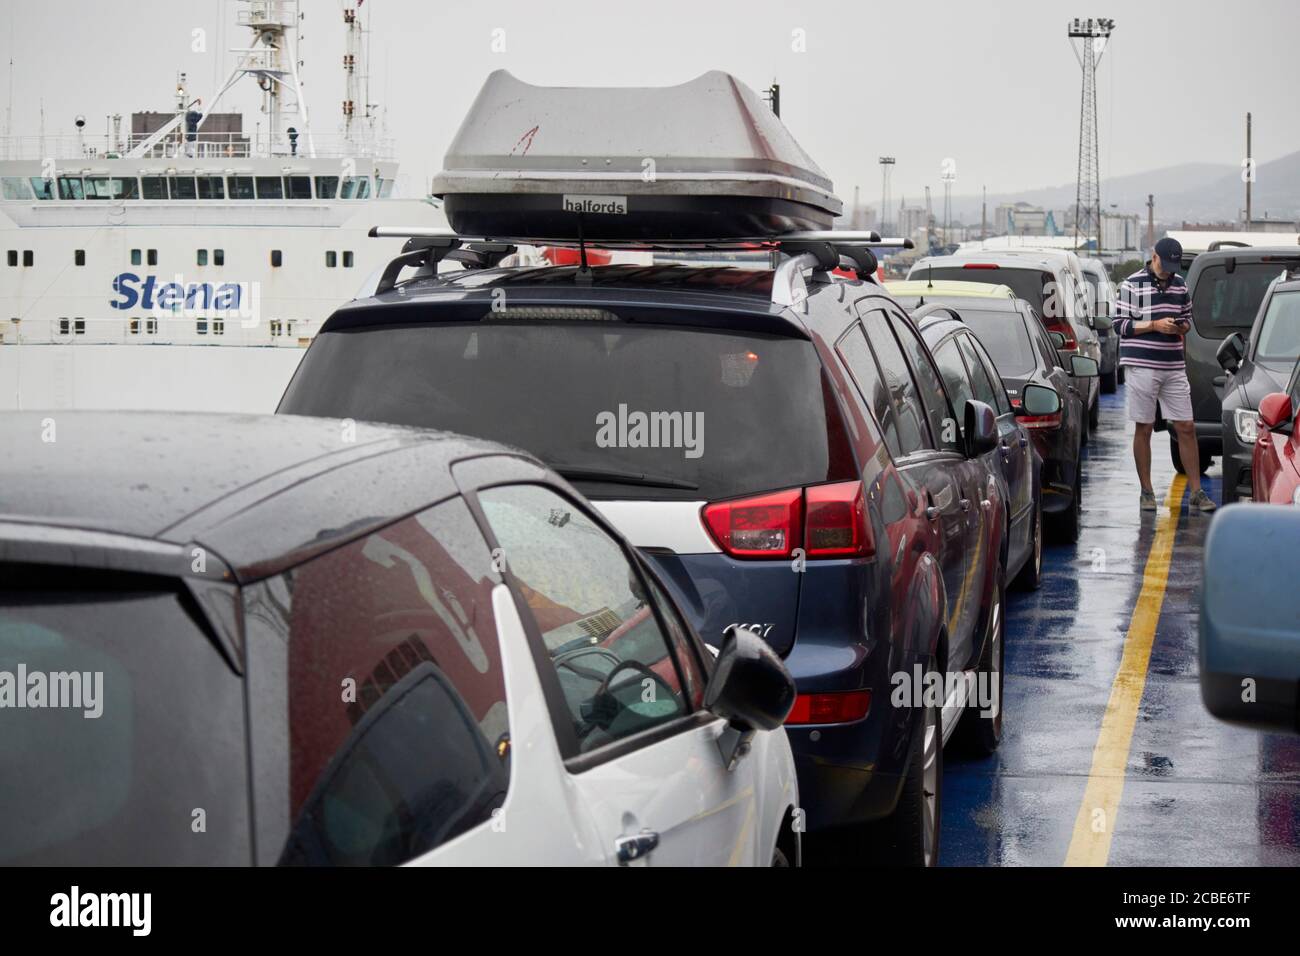 cars parked on the liverpool belfast stena line ferry uk cars travelling to ireland via northern ireland to avoid quarantine period during covid outbr Stock Photo